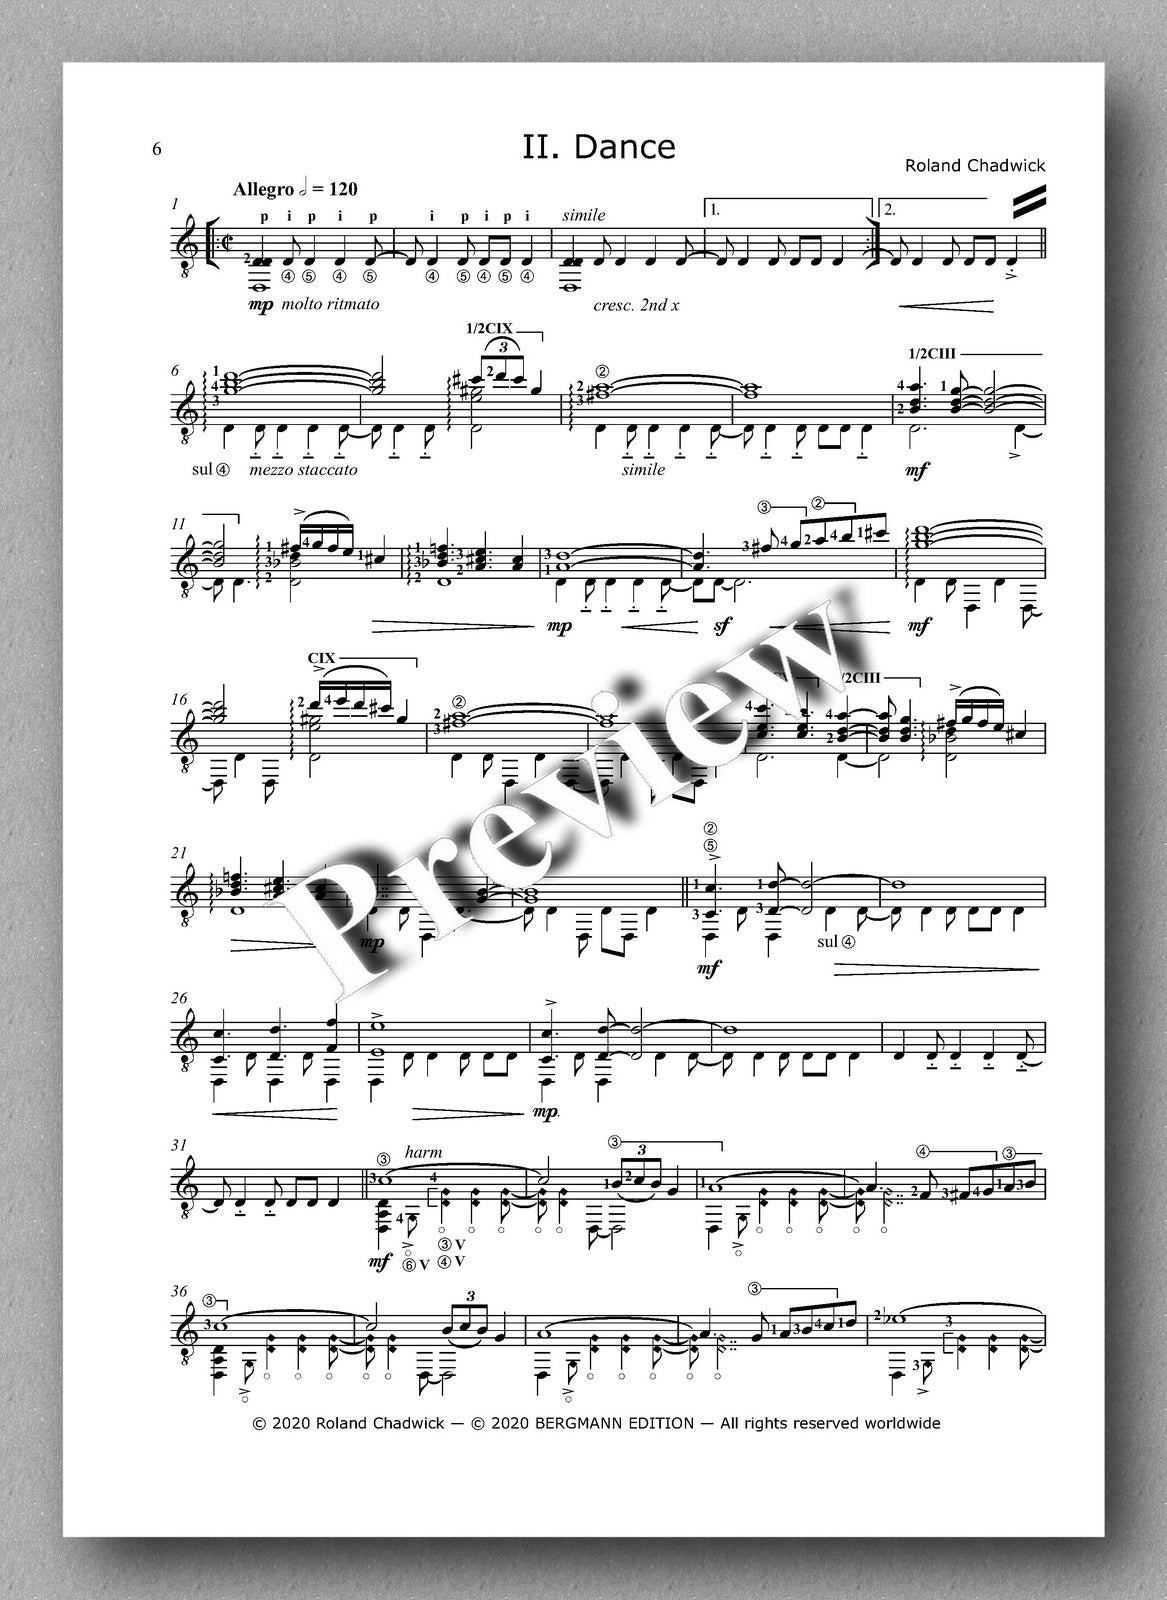 Chadwick, Song & Dance No. 1 - preview of the Music score 2